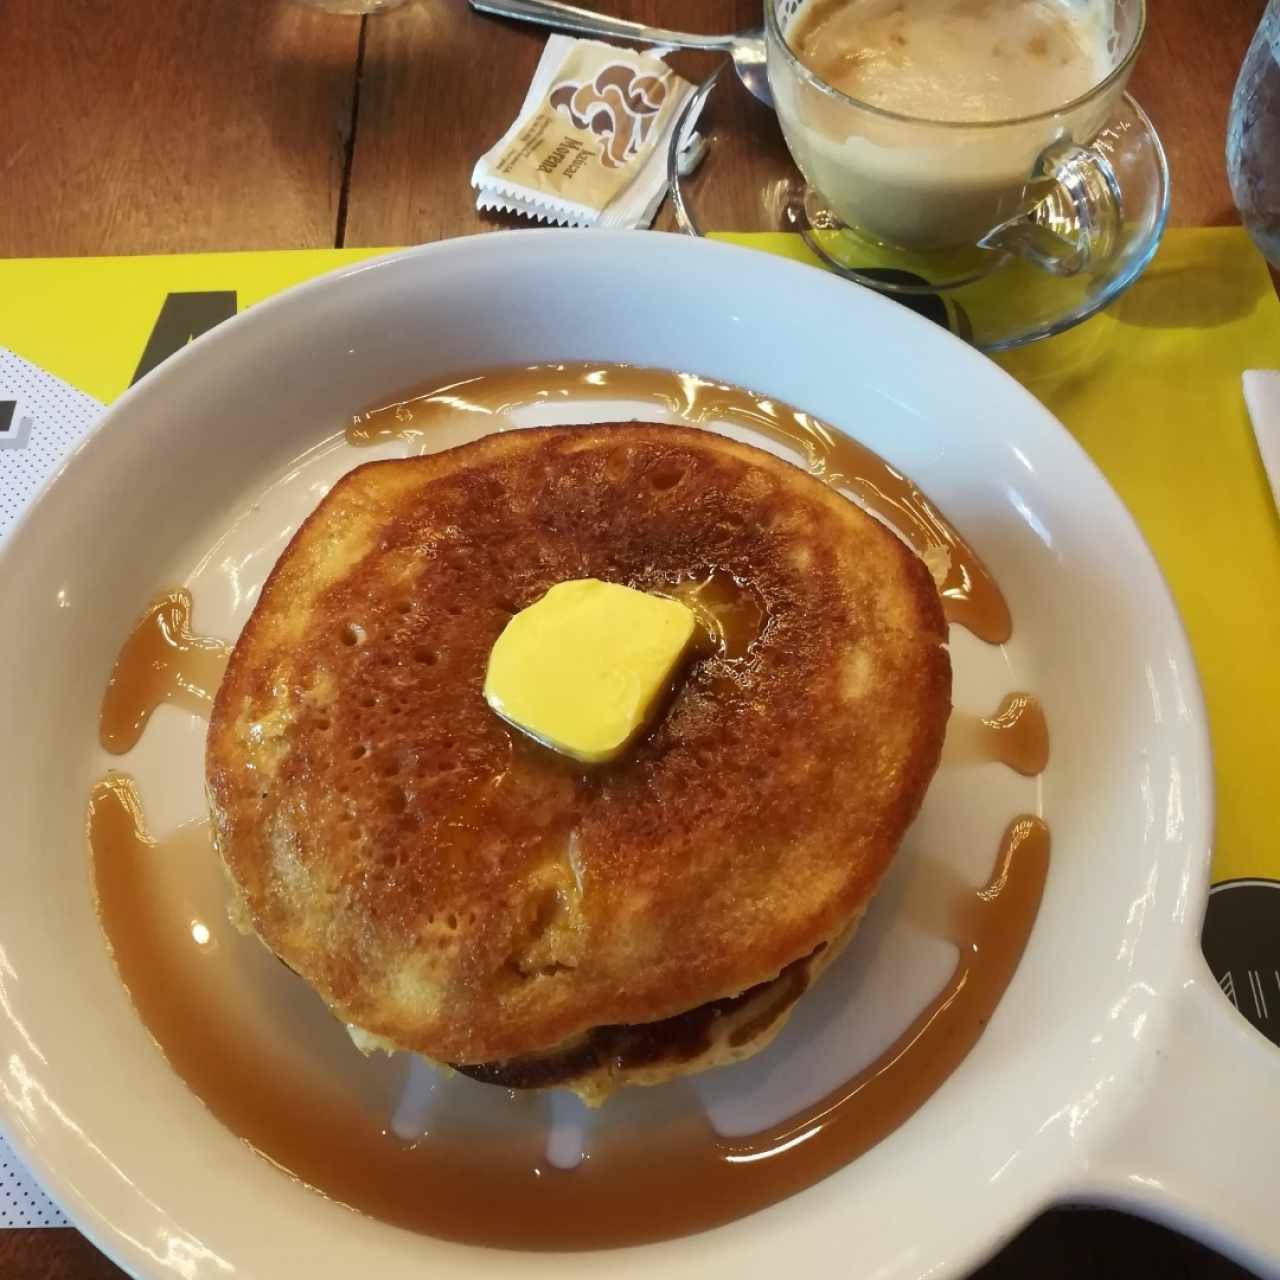 Pancakes con Sirope y Mantequilla